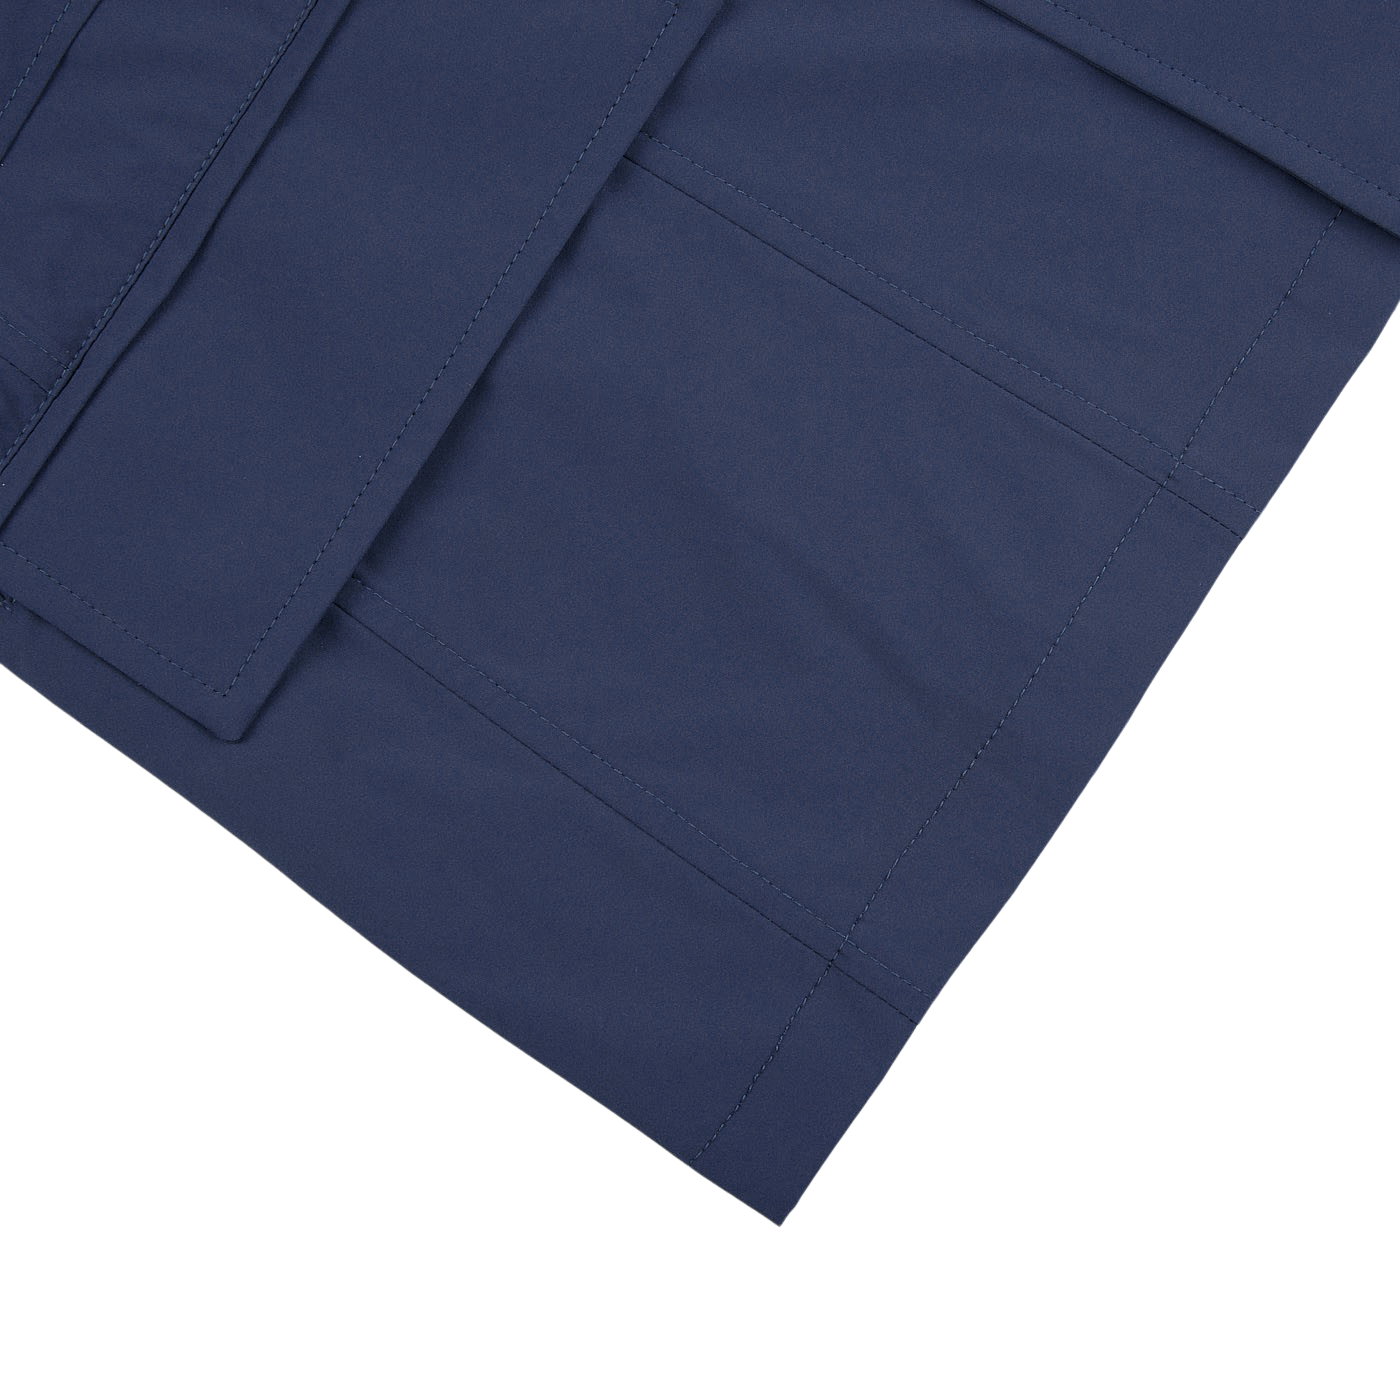 A close up of a Moorer Dark Blue Lightweight Nylon Field Jacket with pockets.